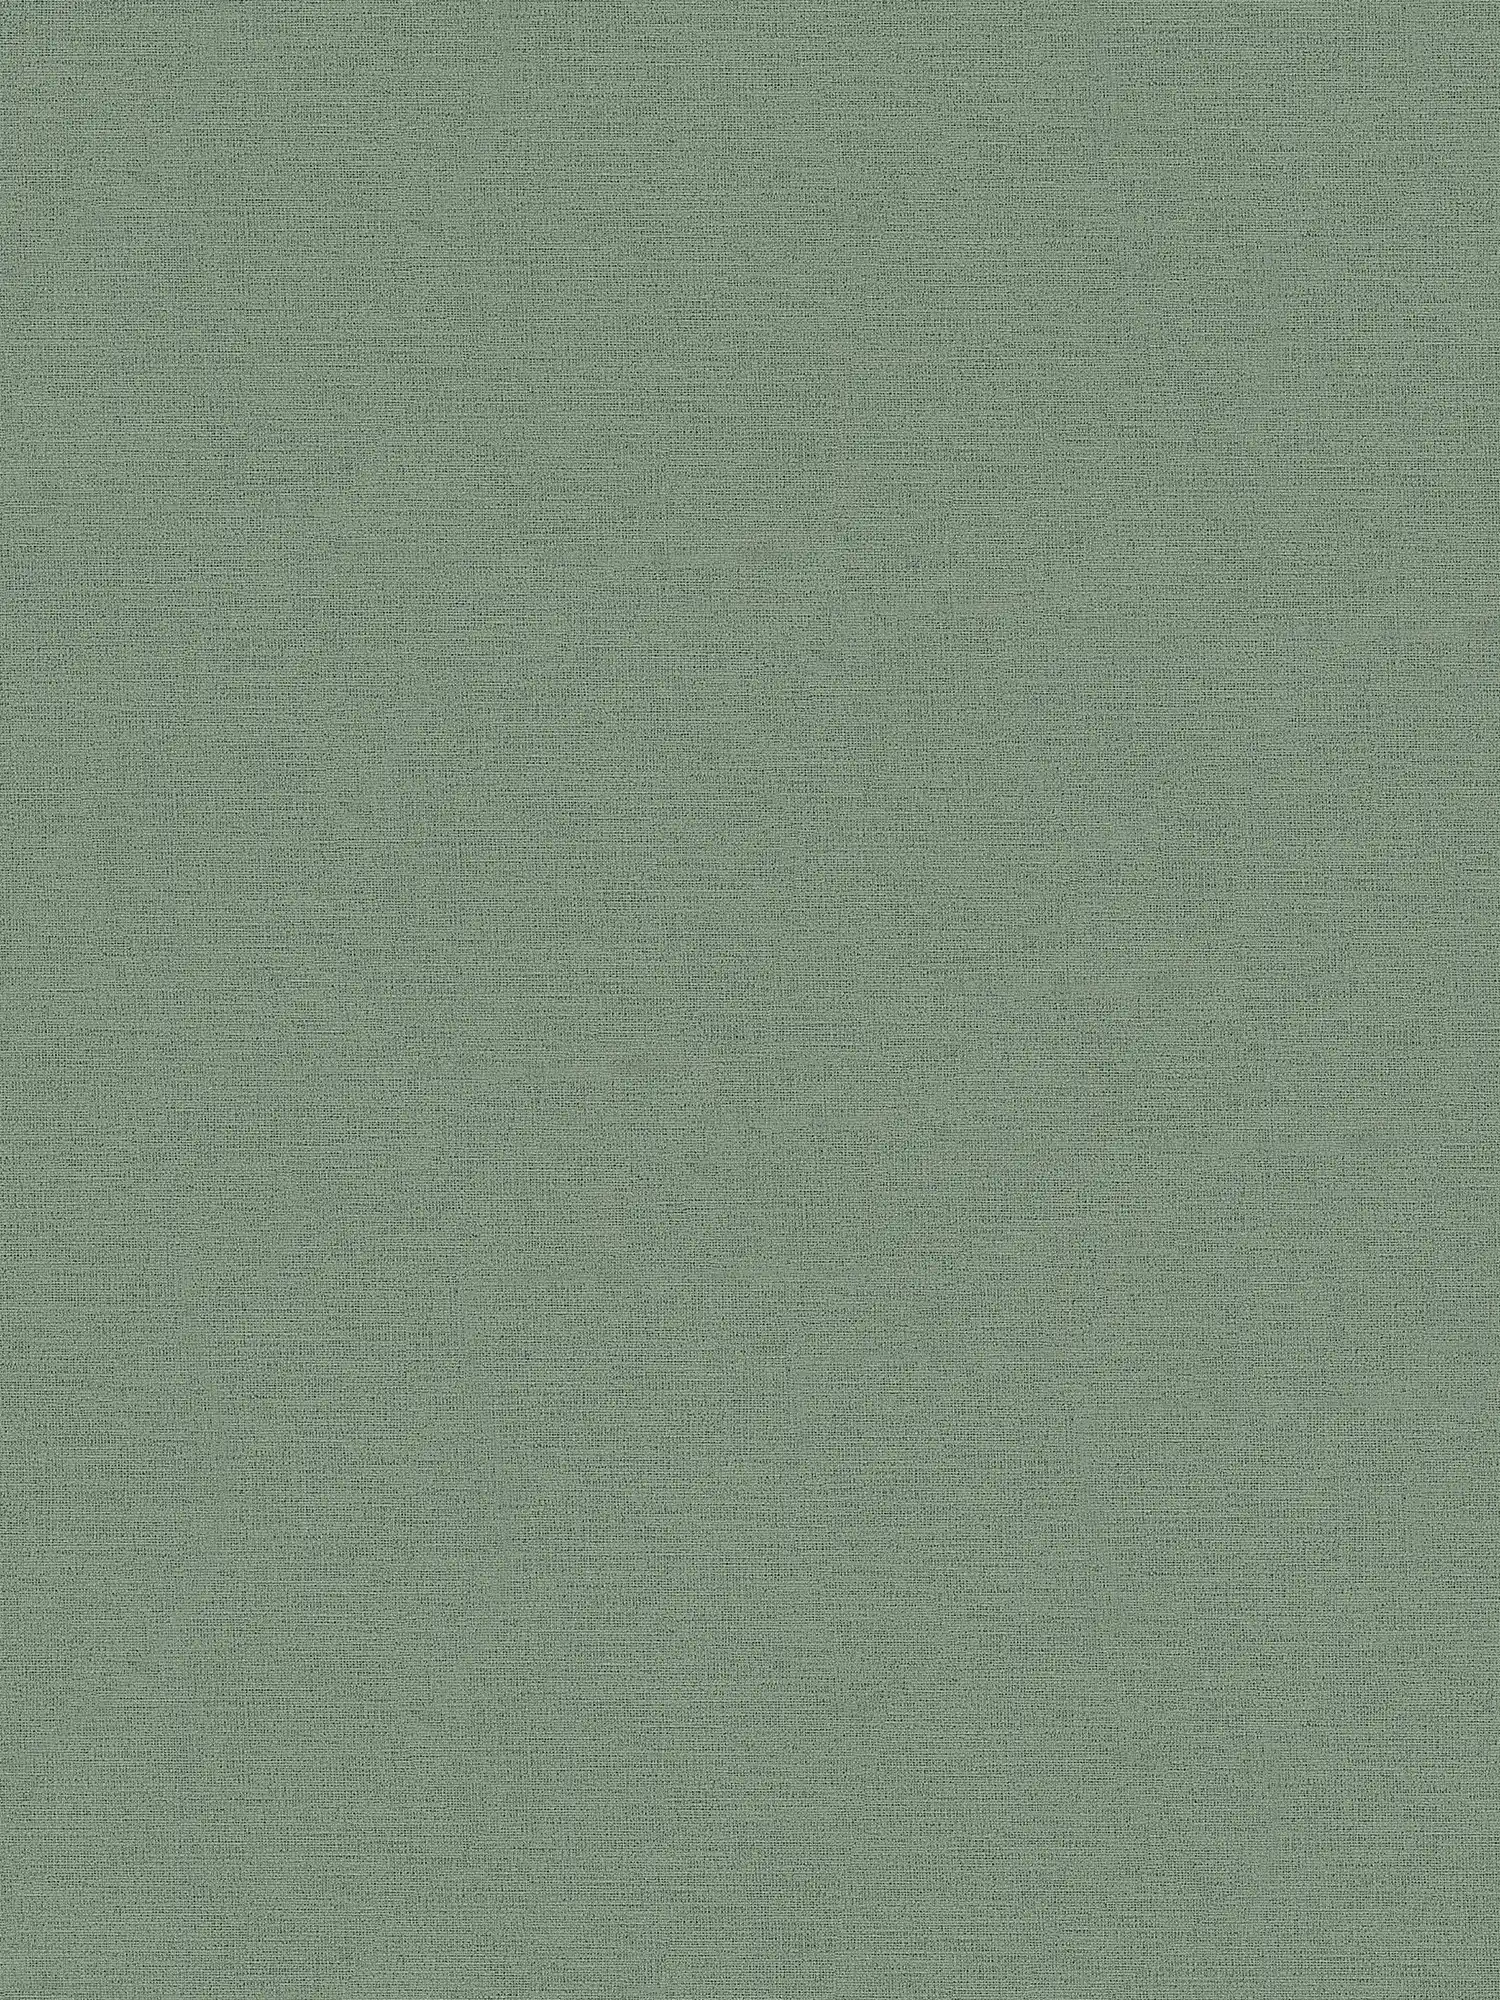 Green grey wallpaper olive green, matte & with textile look
